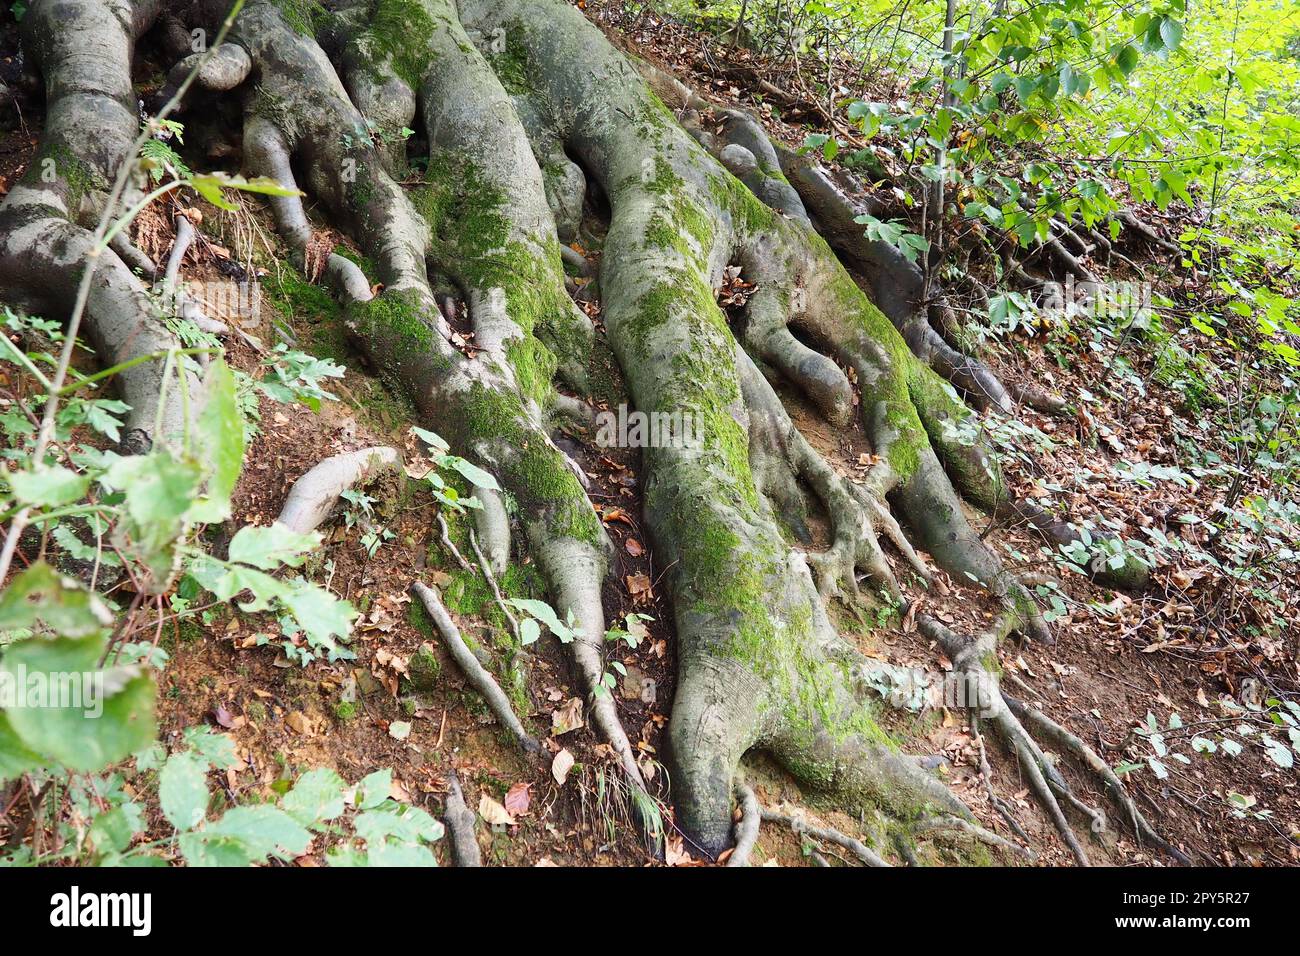 roots covered with green moss. Banja Koviljaca, Serbia, terraces park. The root is the underground part of the plant, which serves to strengthen it in the soil and absorb water and nutrients from it. Stock Photo